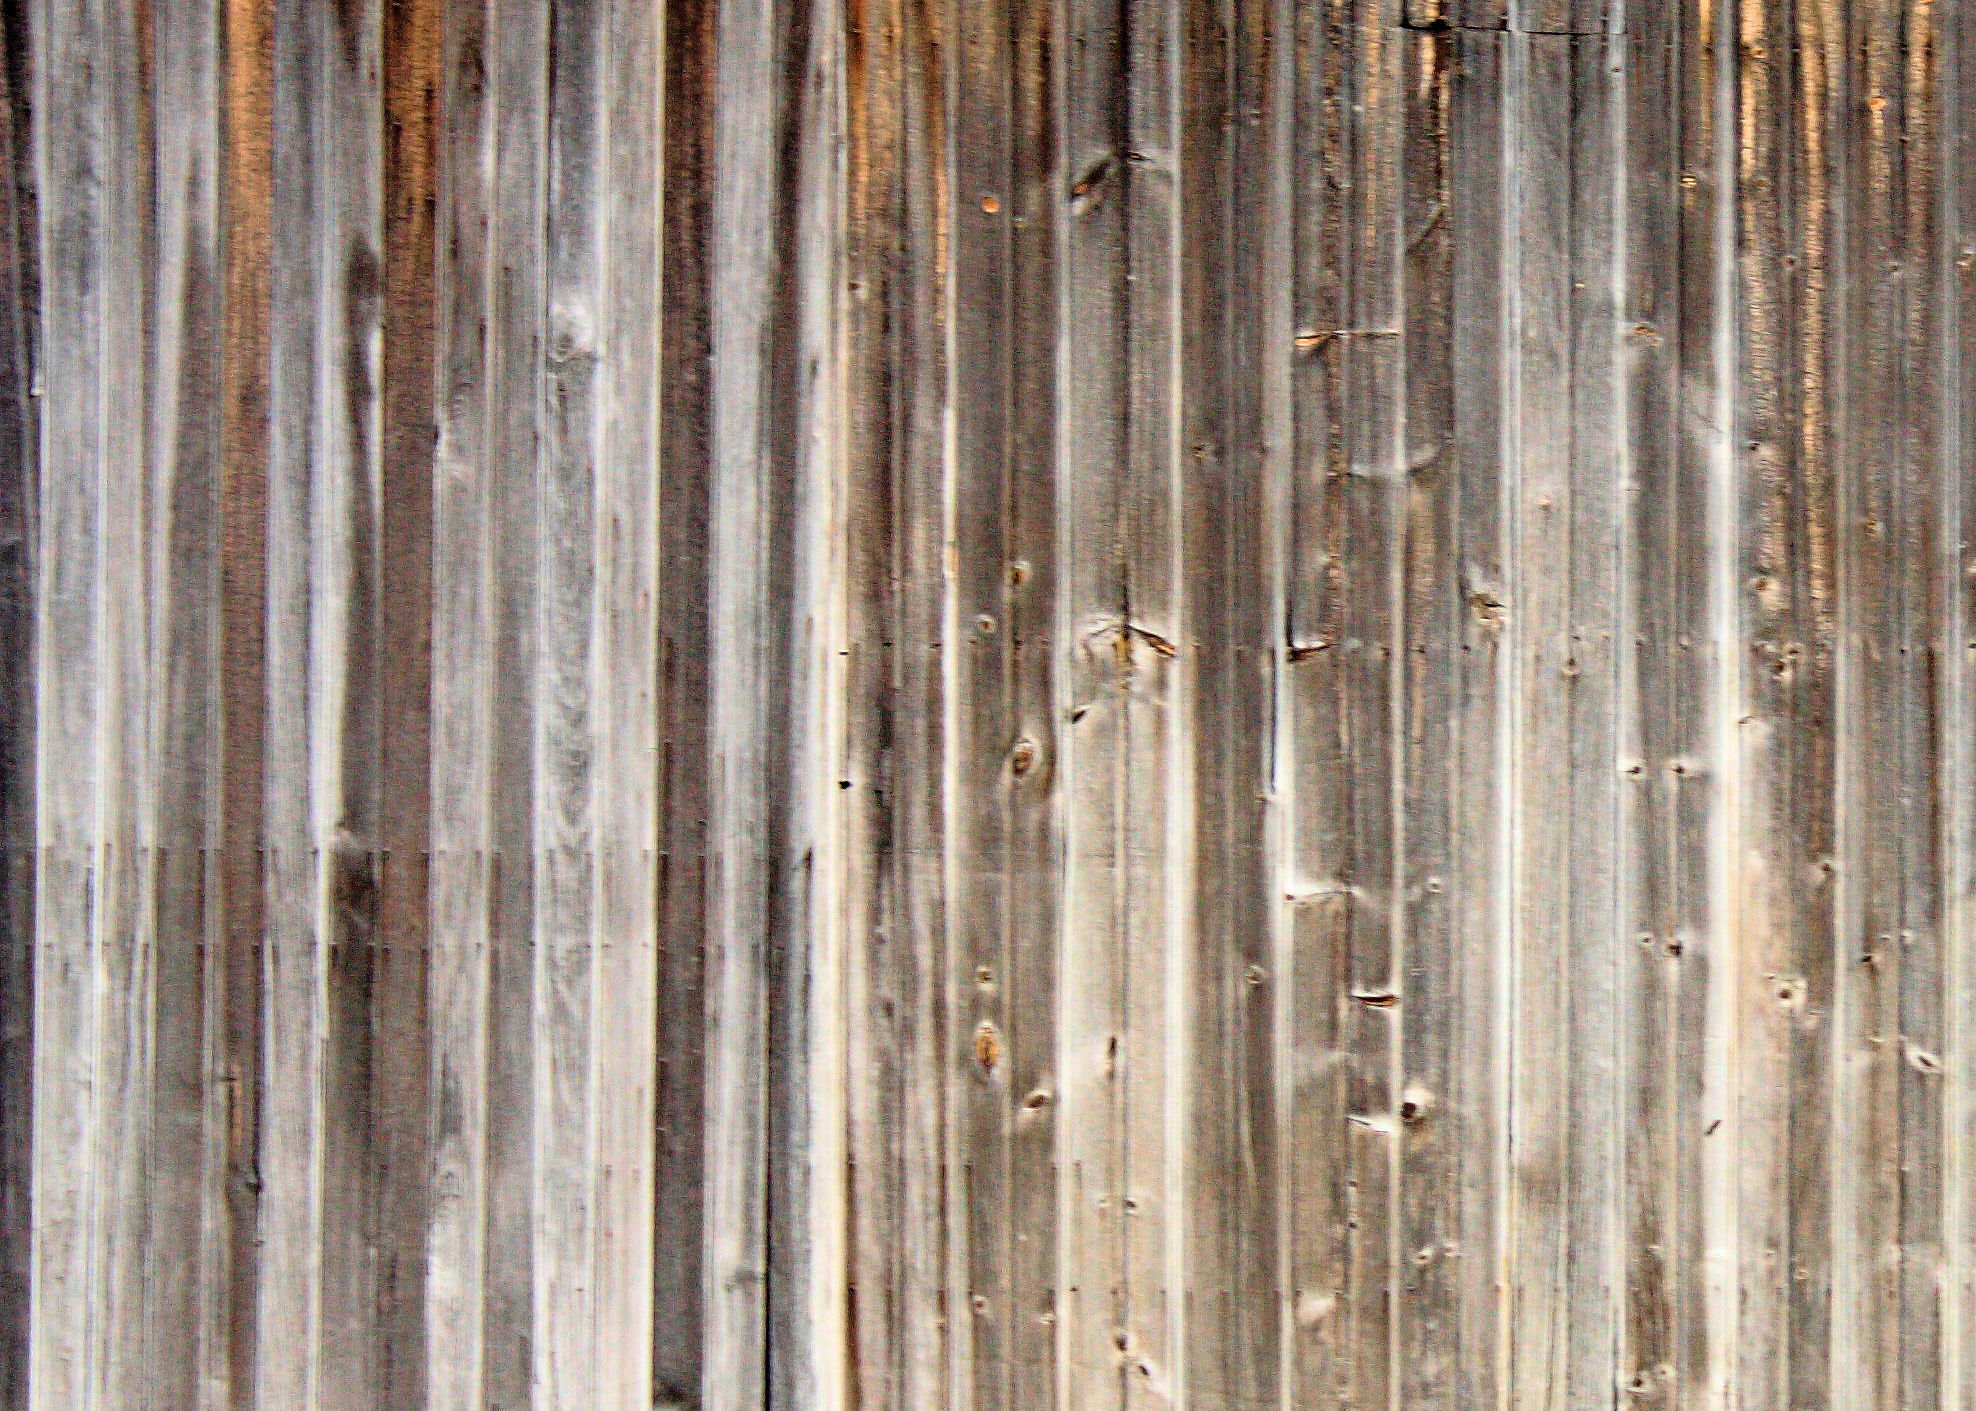 1976x1411 ... Rustic Barn Wood Background And Rustic Barn Wood Background ...